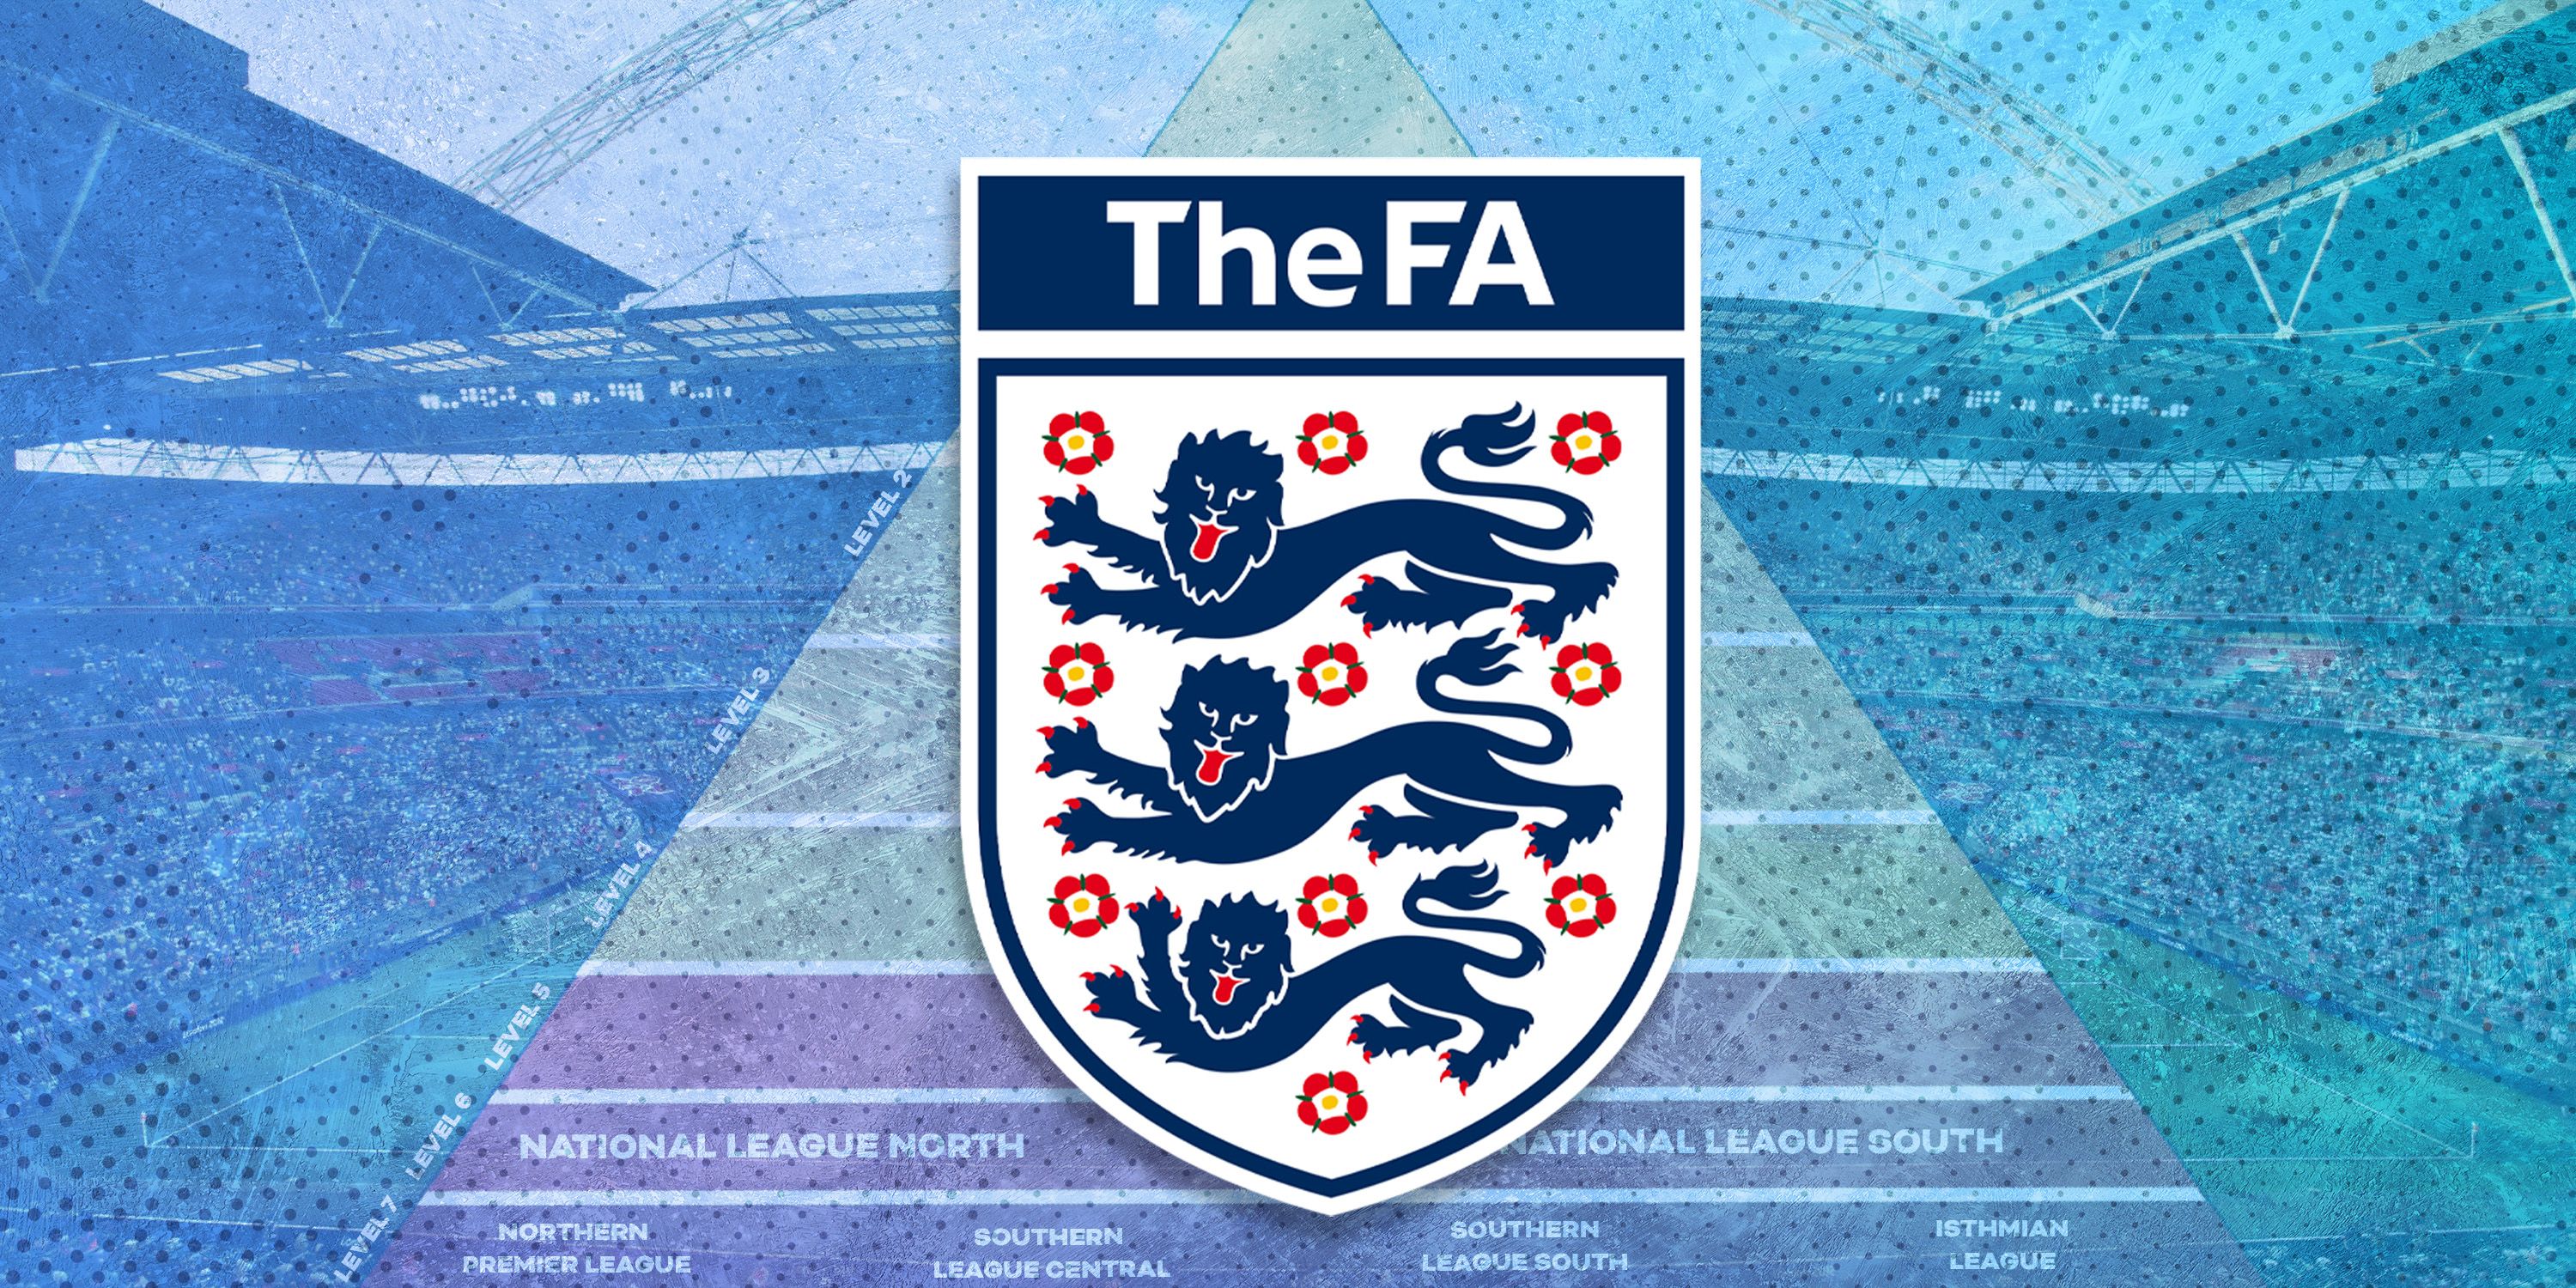 Collage of the English FA badge and the football pyramid chart.